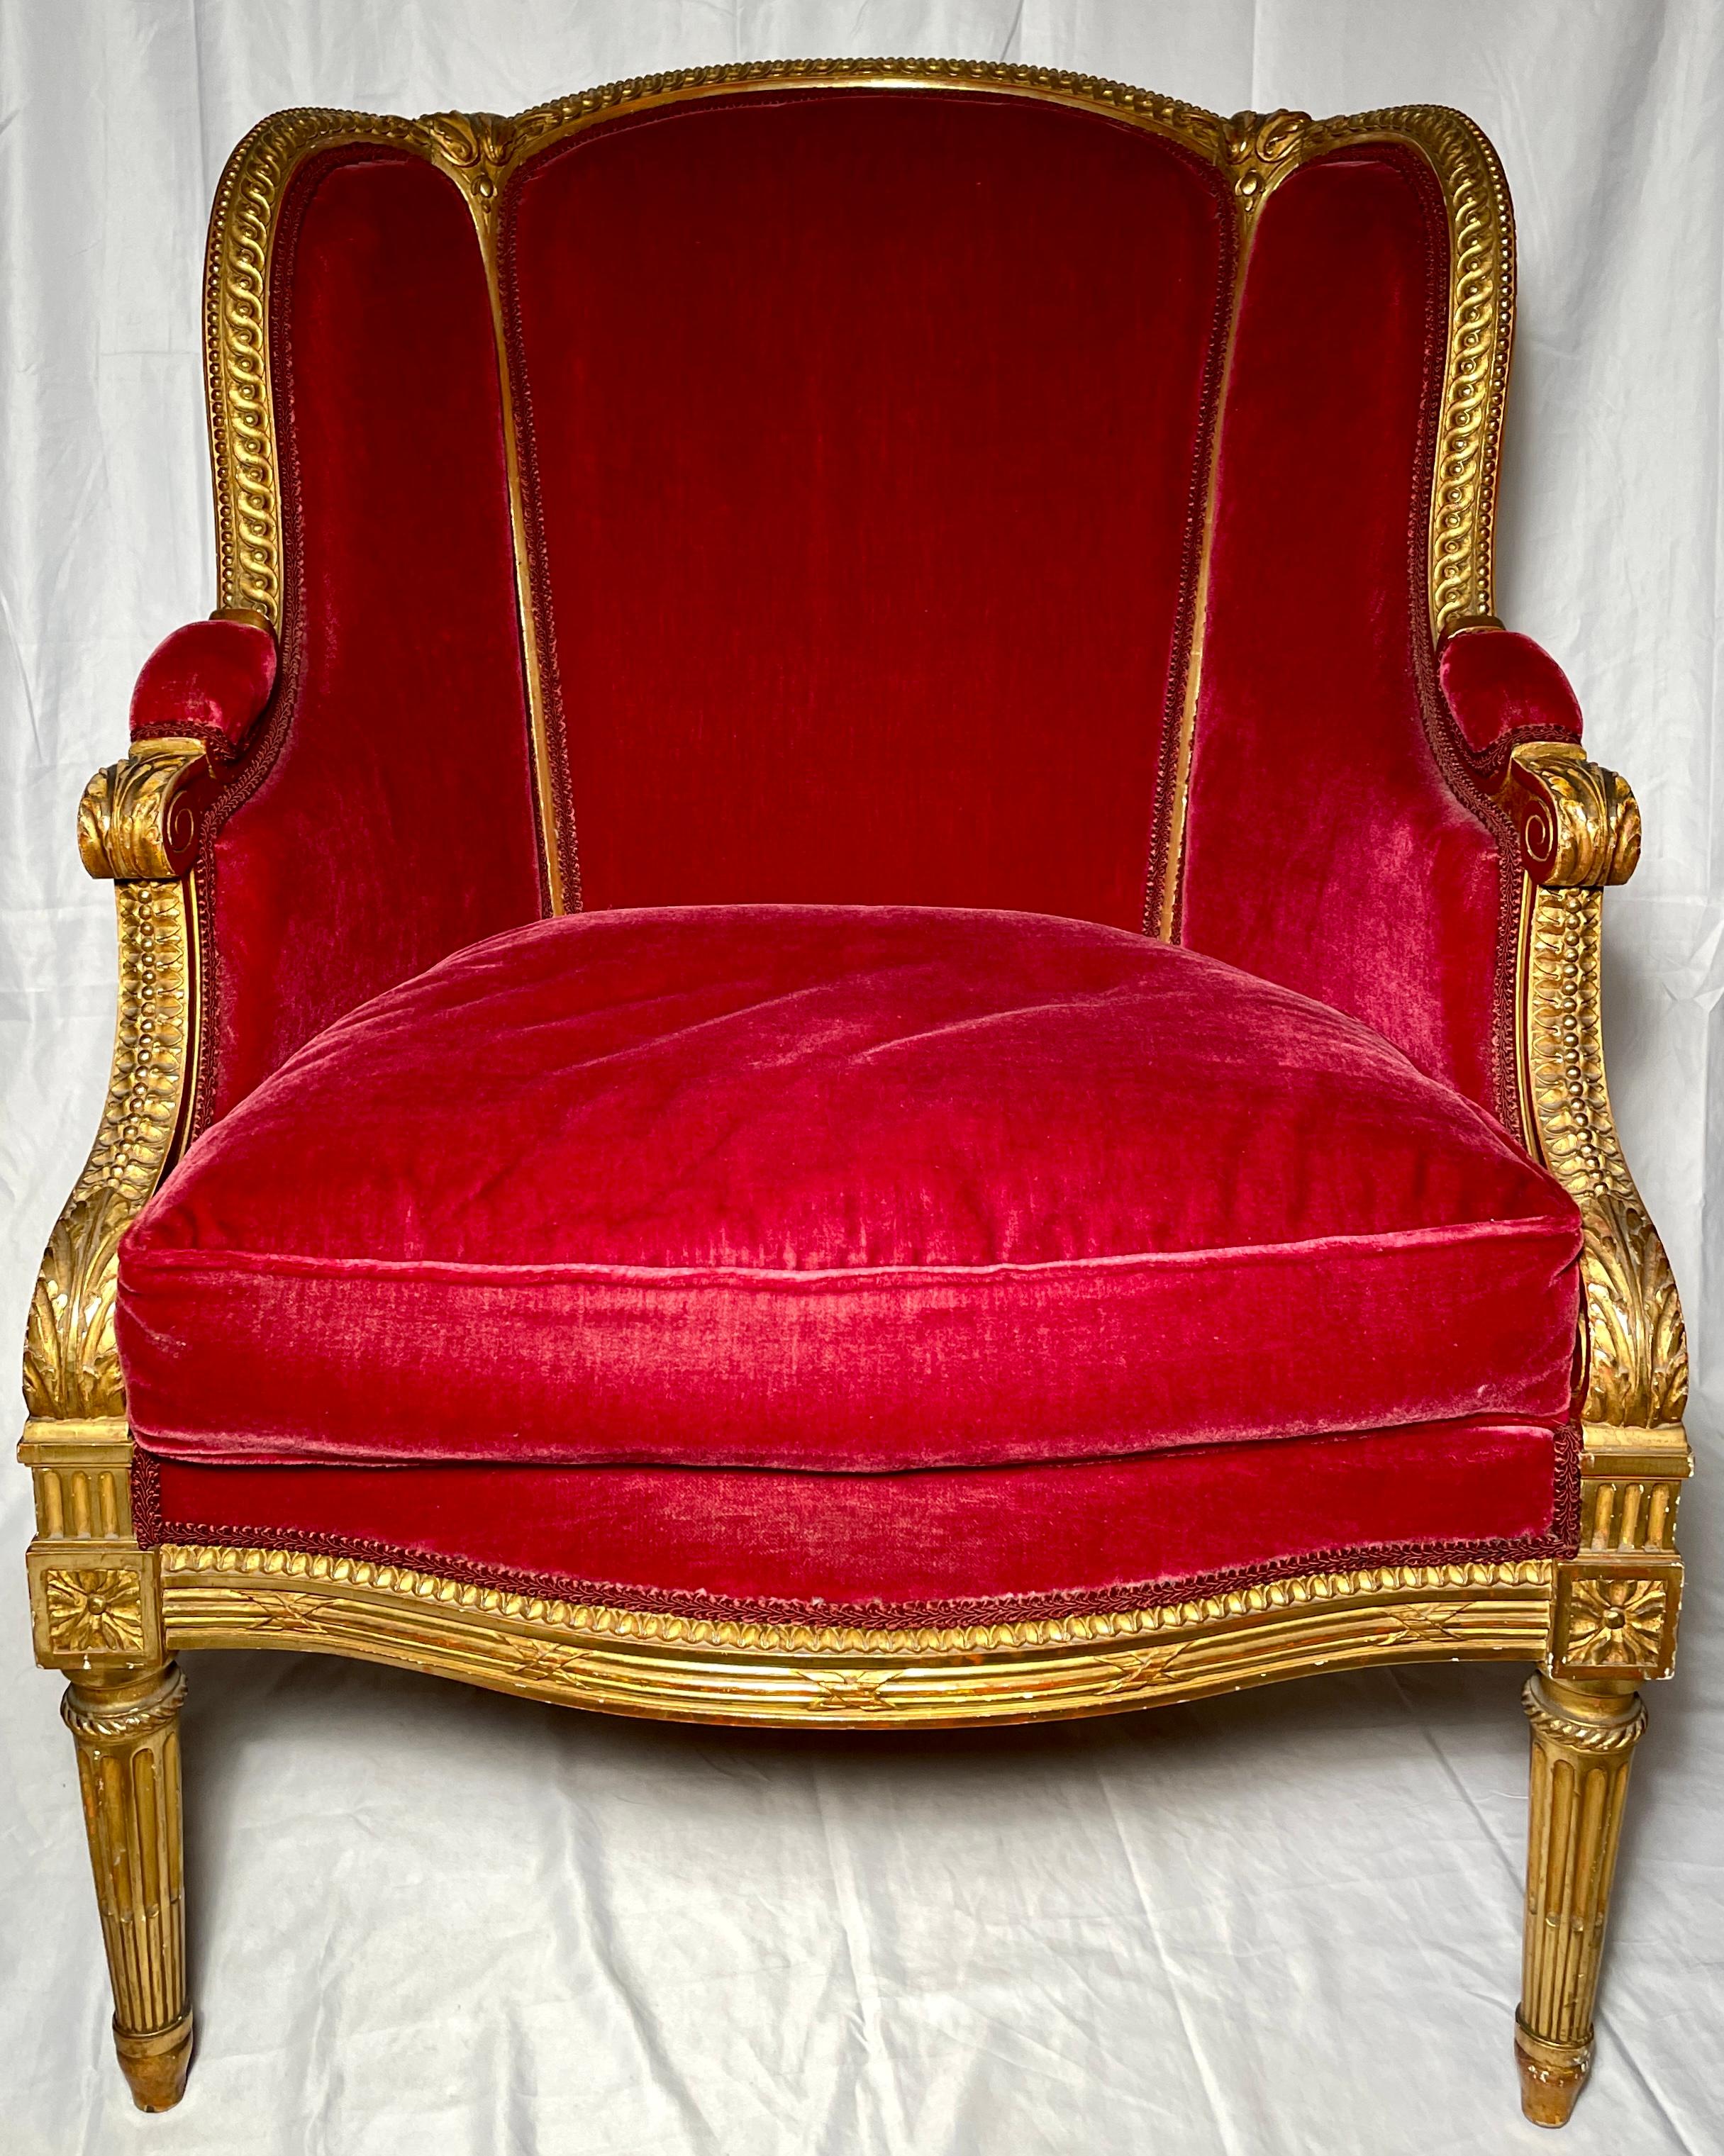 Antique French Louis XVI chaise lounge and ottoman, circa 1890. 
Measurements: 
Chair- 37.75 inches high x 27 inches wide x 20 deep 
Ottoman- 14.5 inches high x 27 inches wide x 22 inches deep.